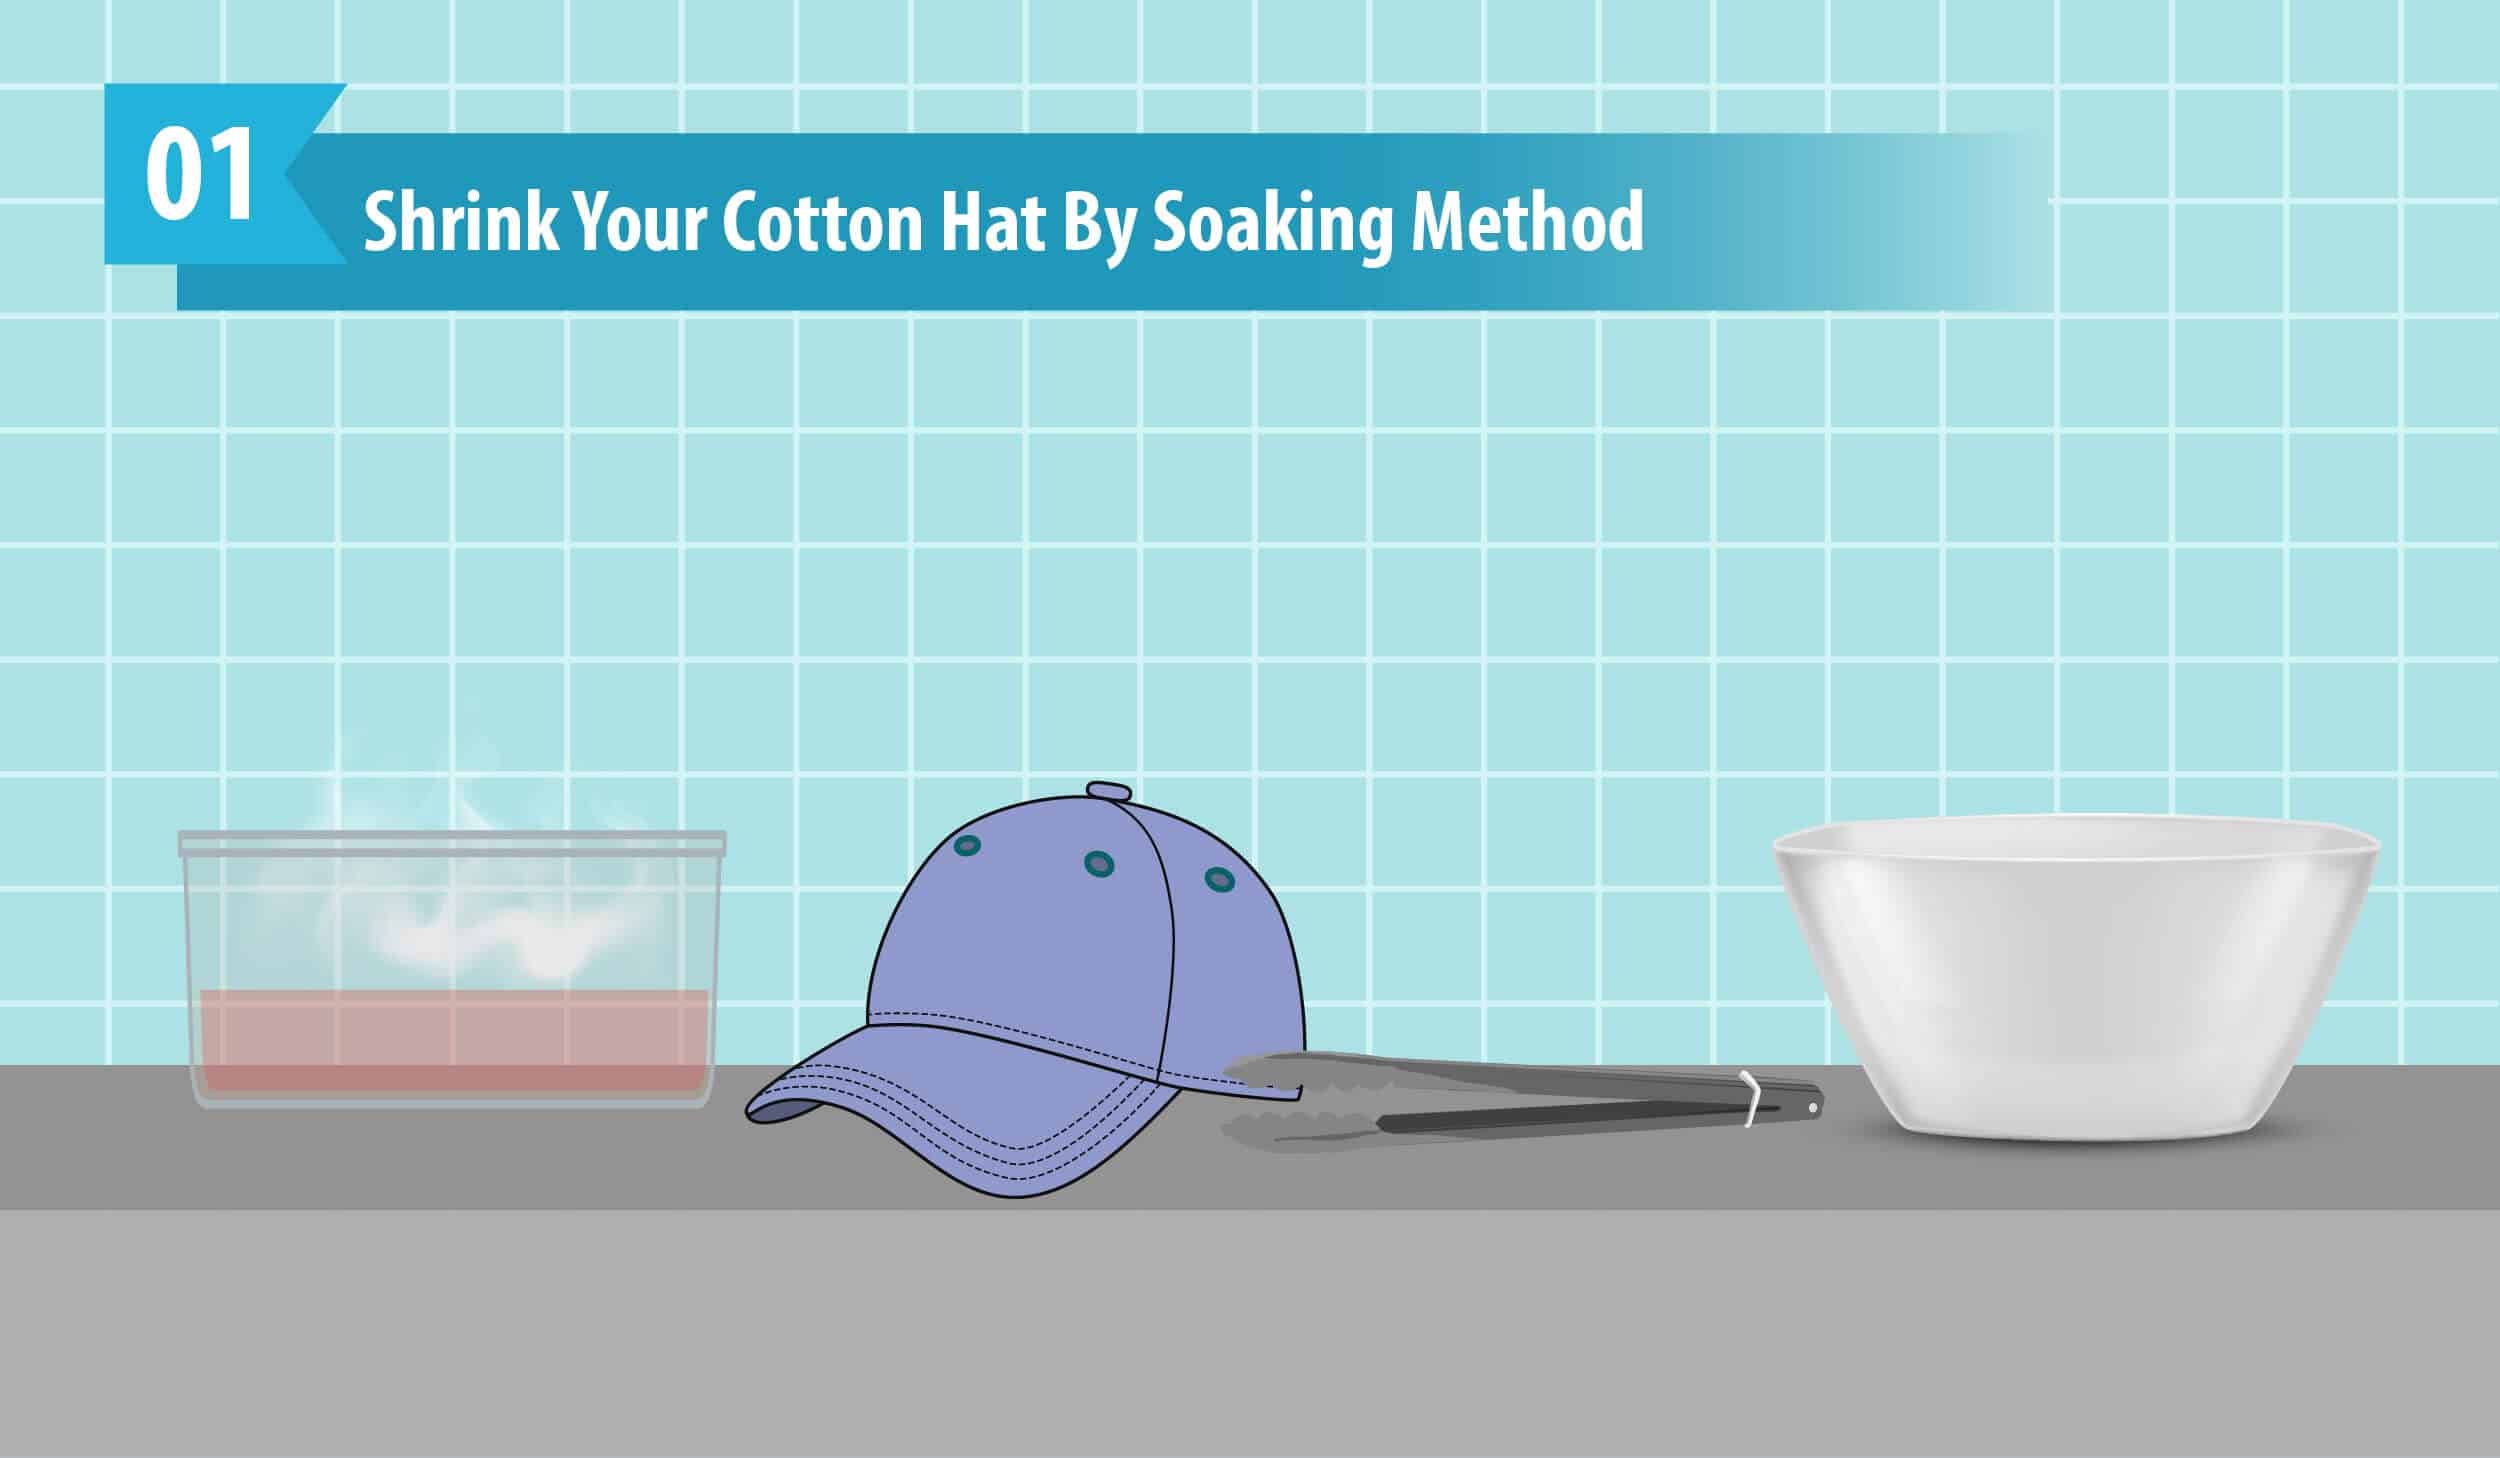 Shrink Your Cotton Hat By Soaking Method